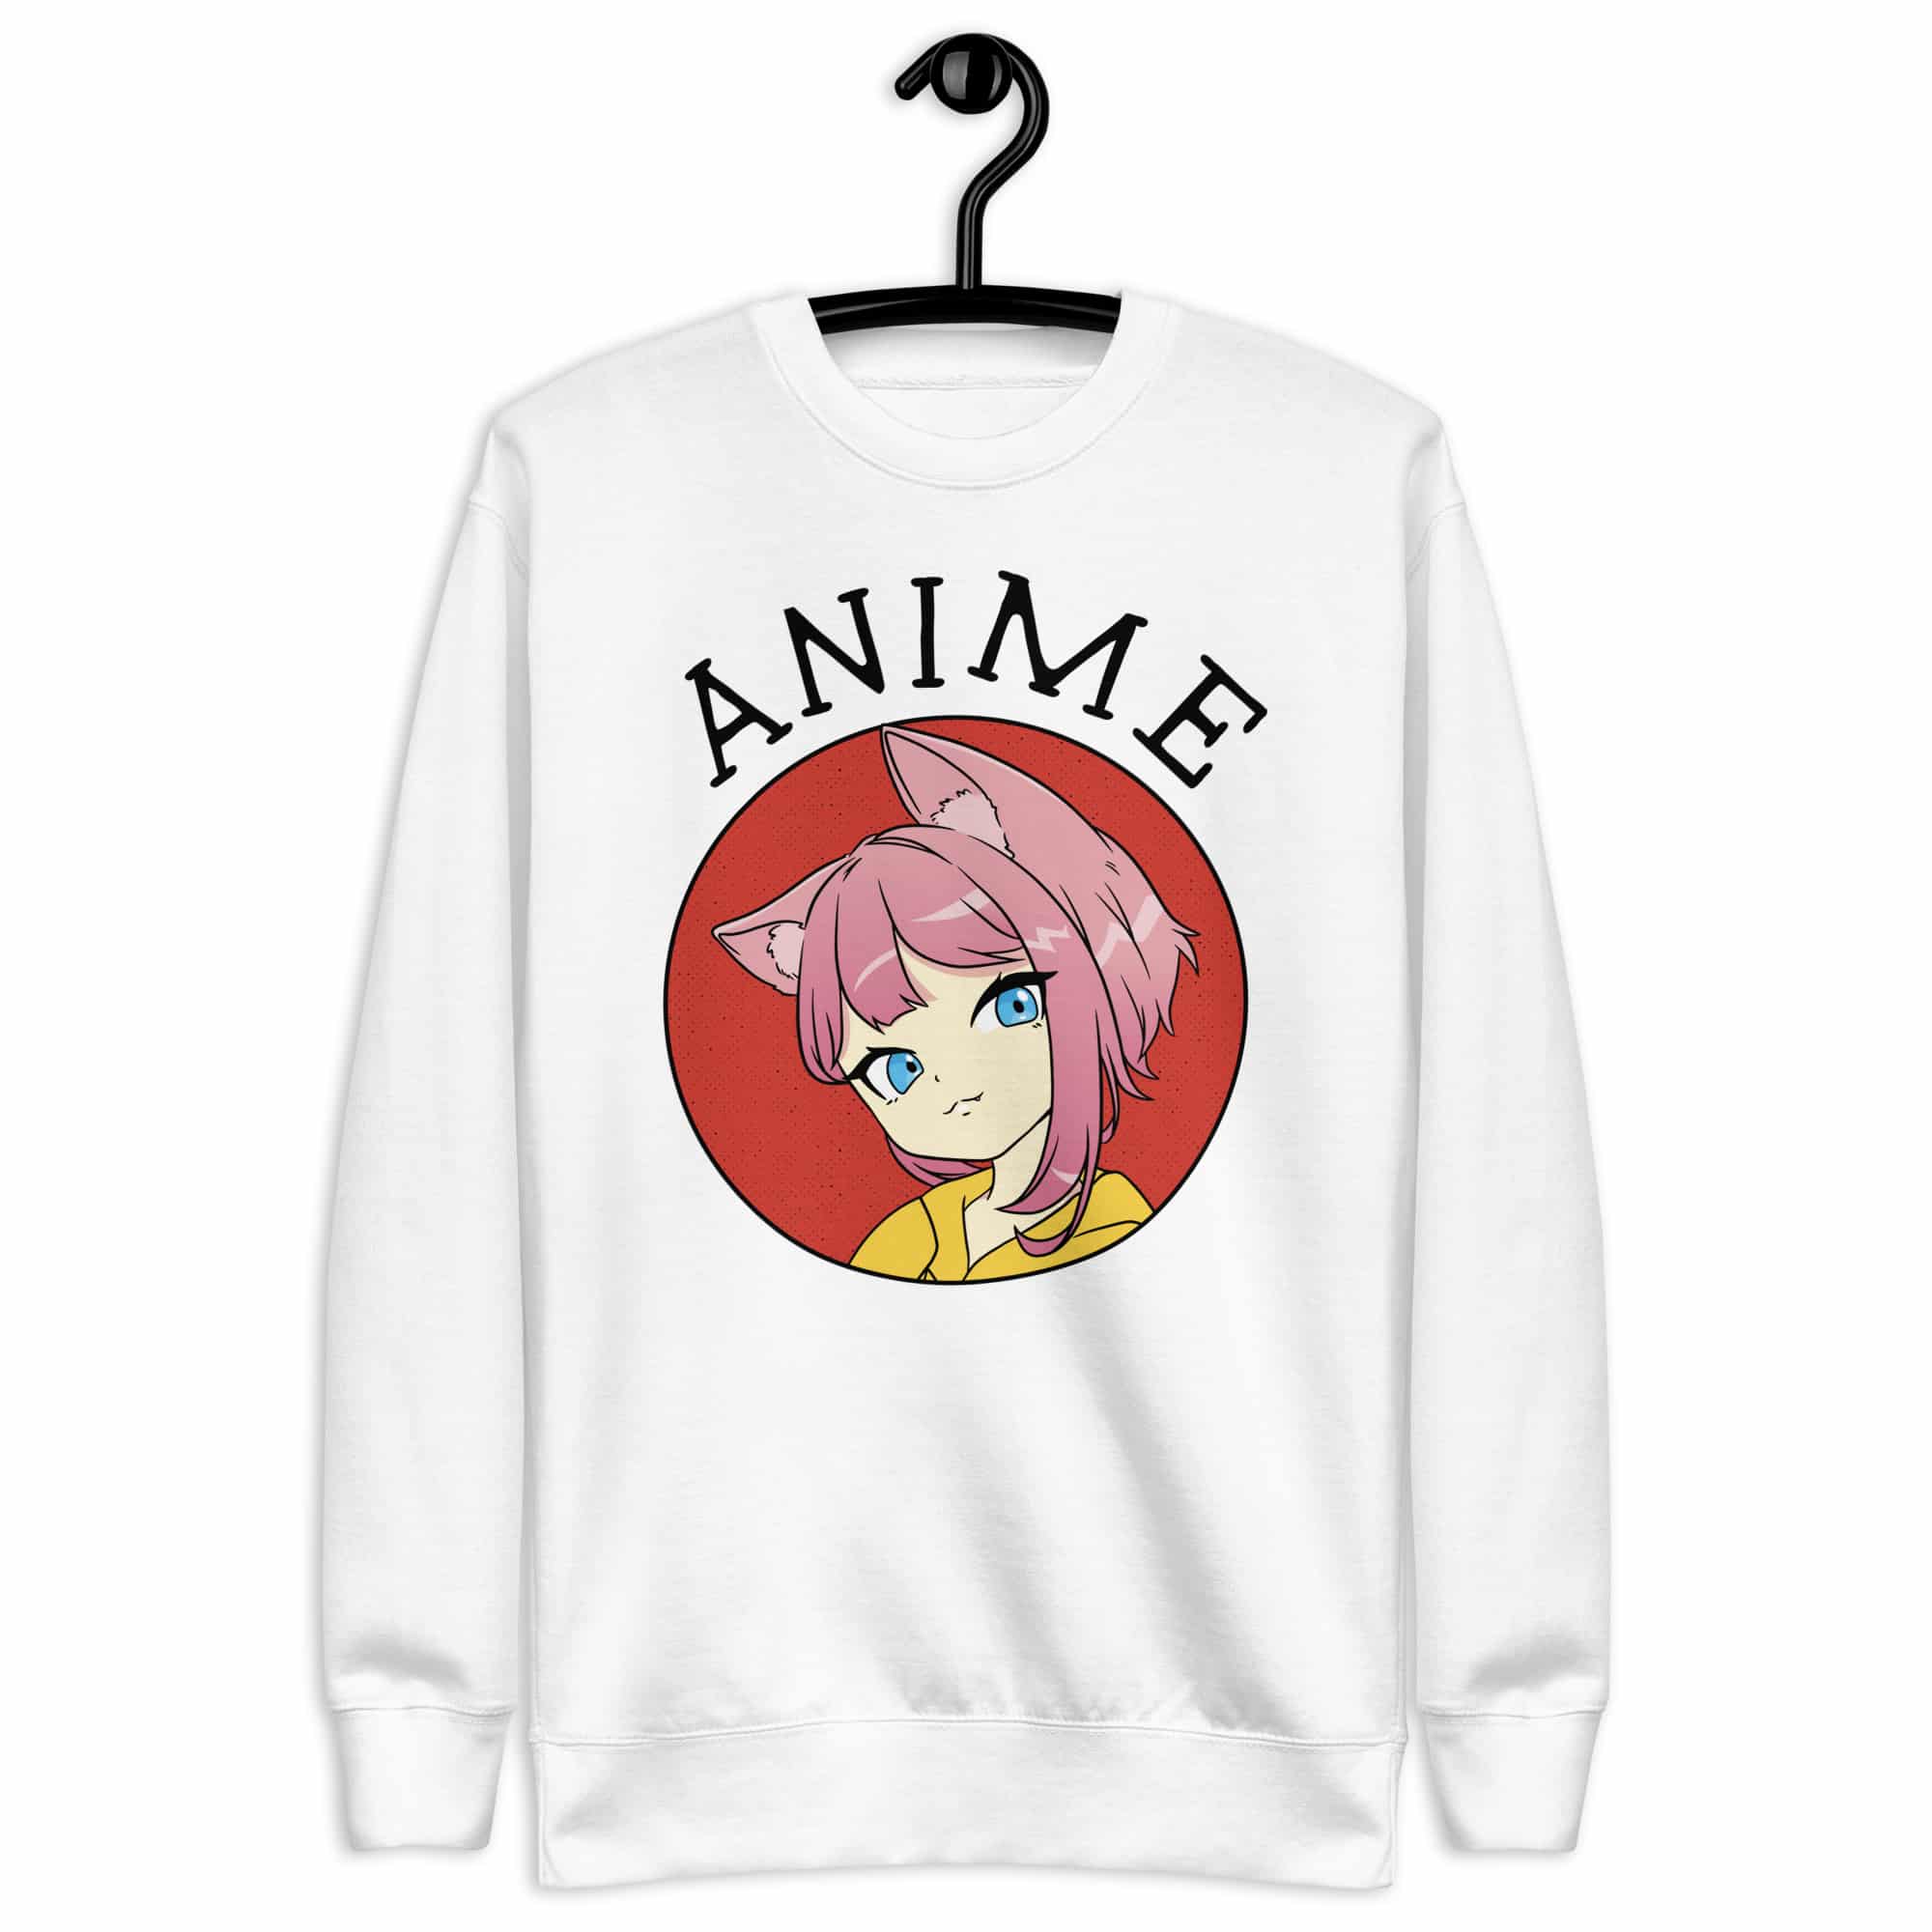 Anime Cat Girl Sweatshirt Video game store Gaming merchandise Gaming accessories shop Online gaming store Video game shop near me Gaming console store PC gaming store Gaming gear shop Retro gaming shop Board game shop Anime merchandise Anime store online Japanese anime shop Anime figurines Manga shop Anime DVDs Anime accessories Anime apparel Anime collectibles Anime gifts